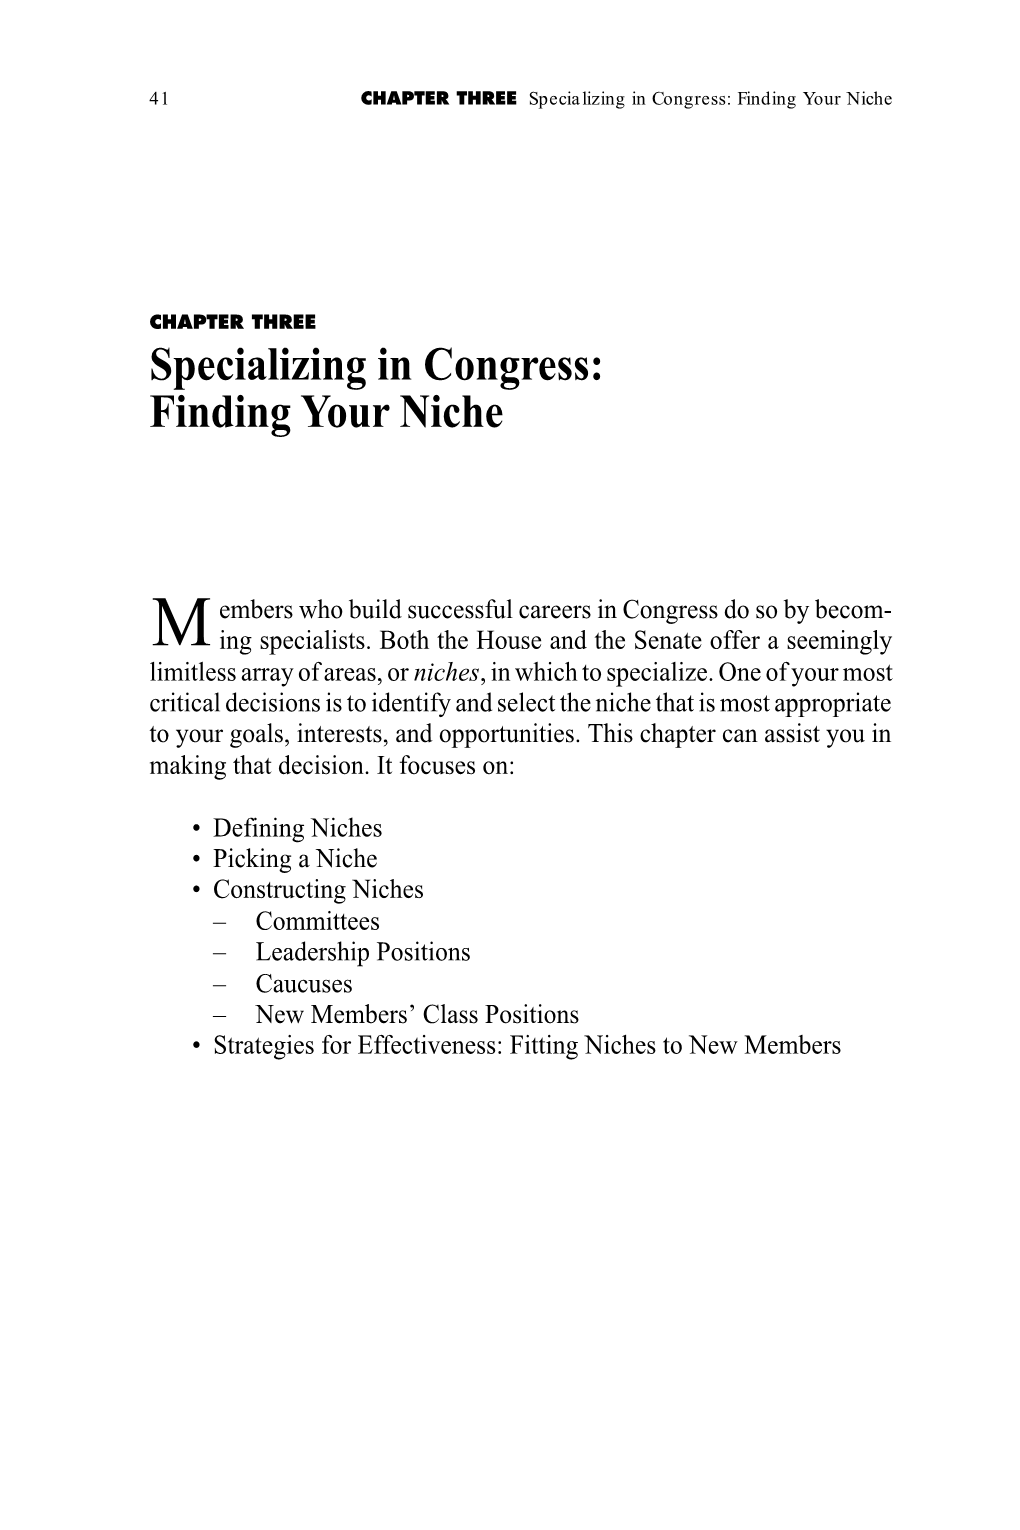 Specializing in Congress: Finding Your Niche